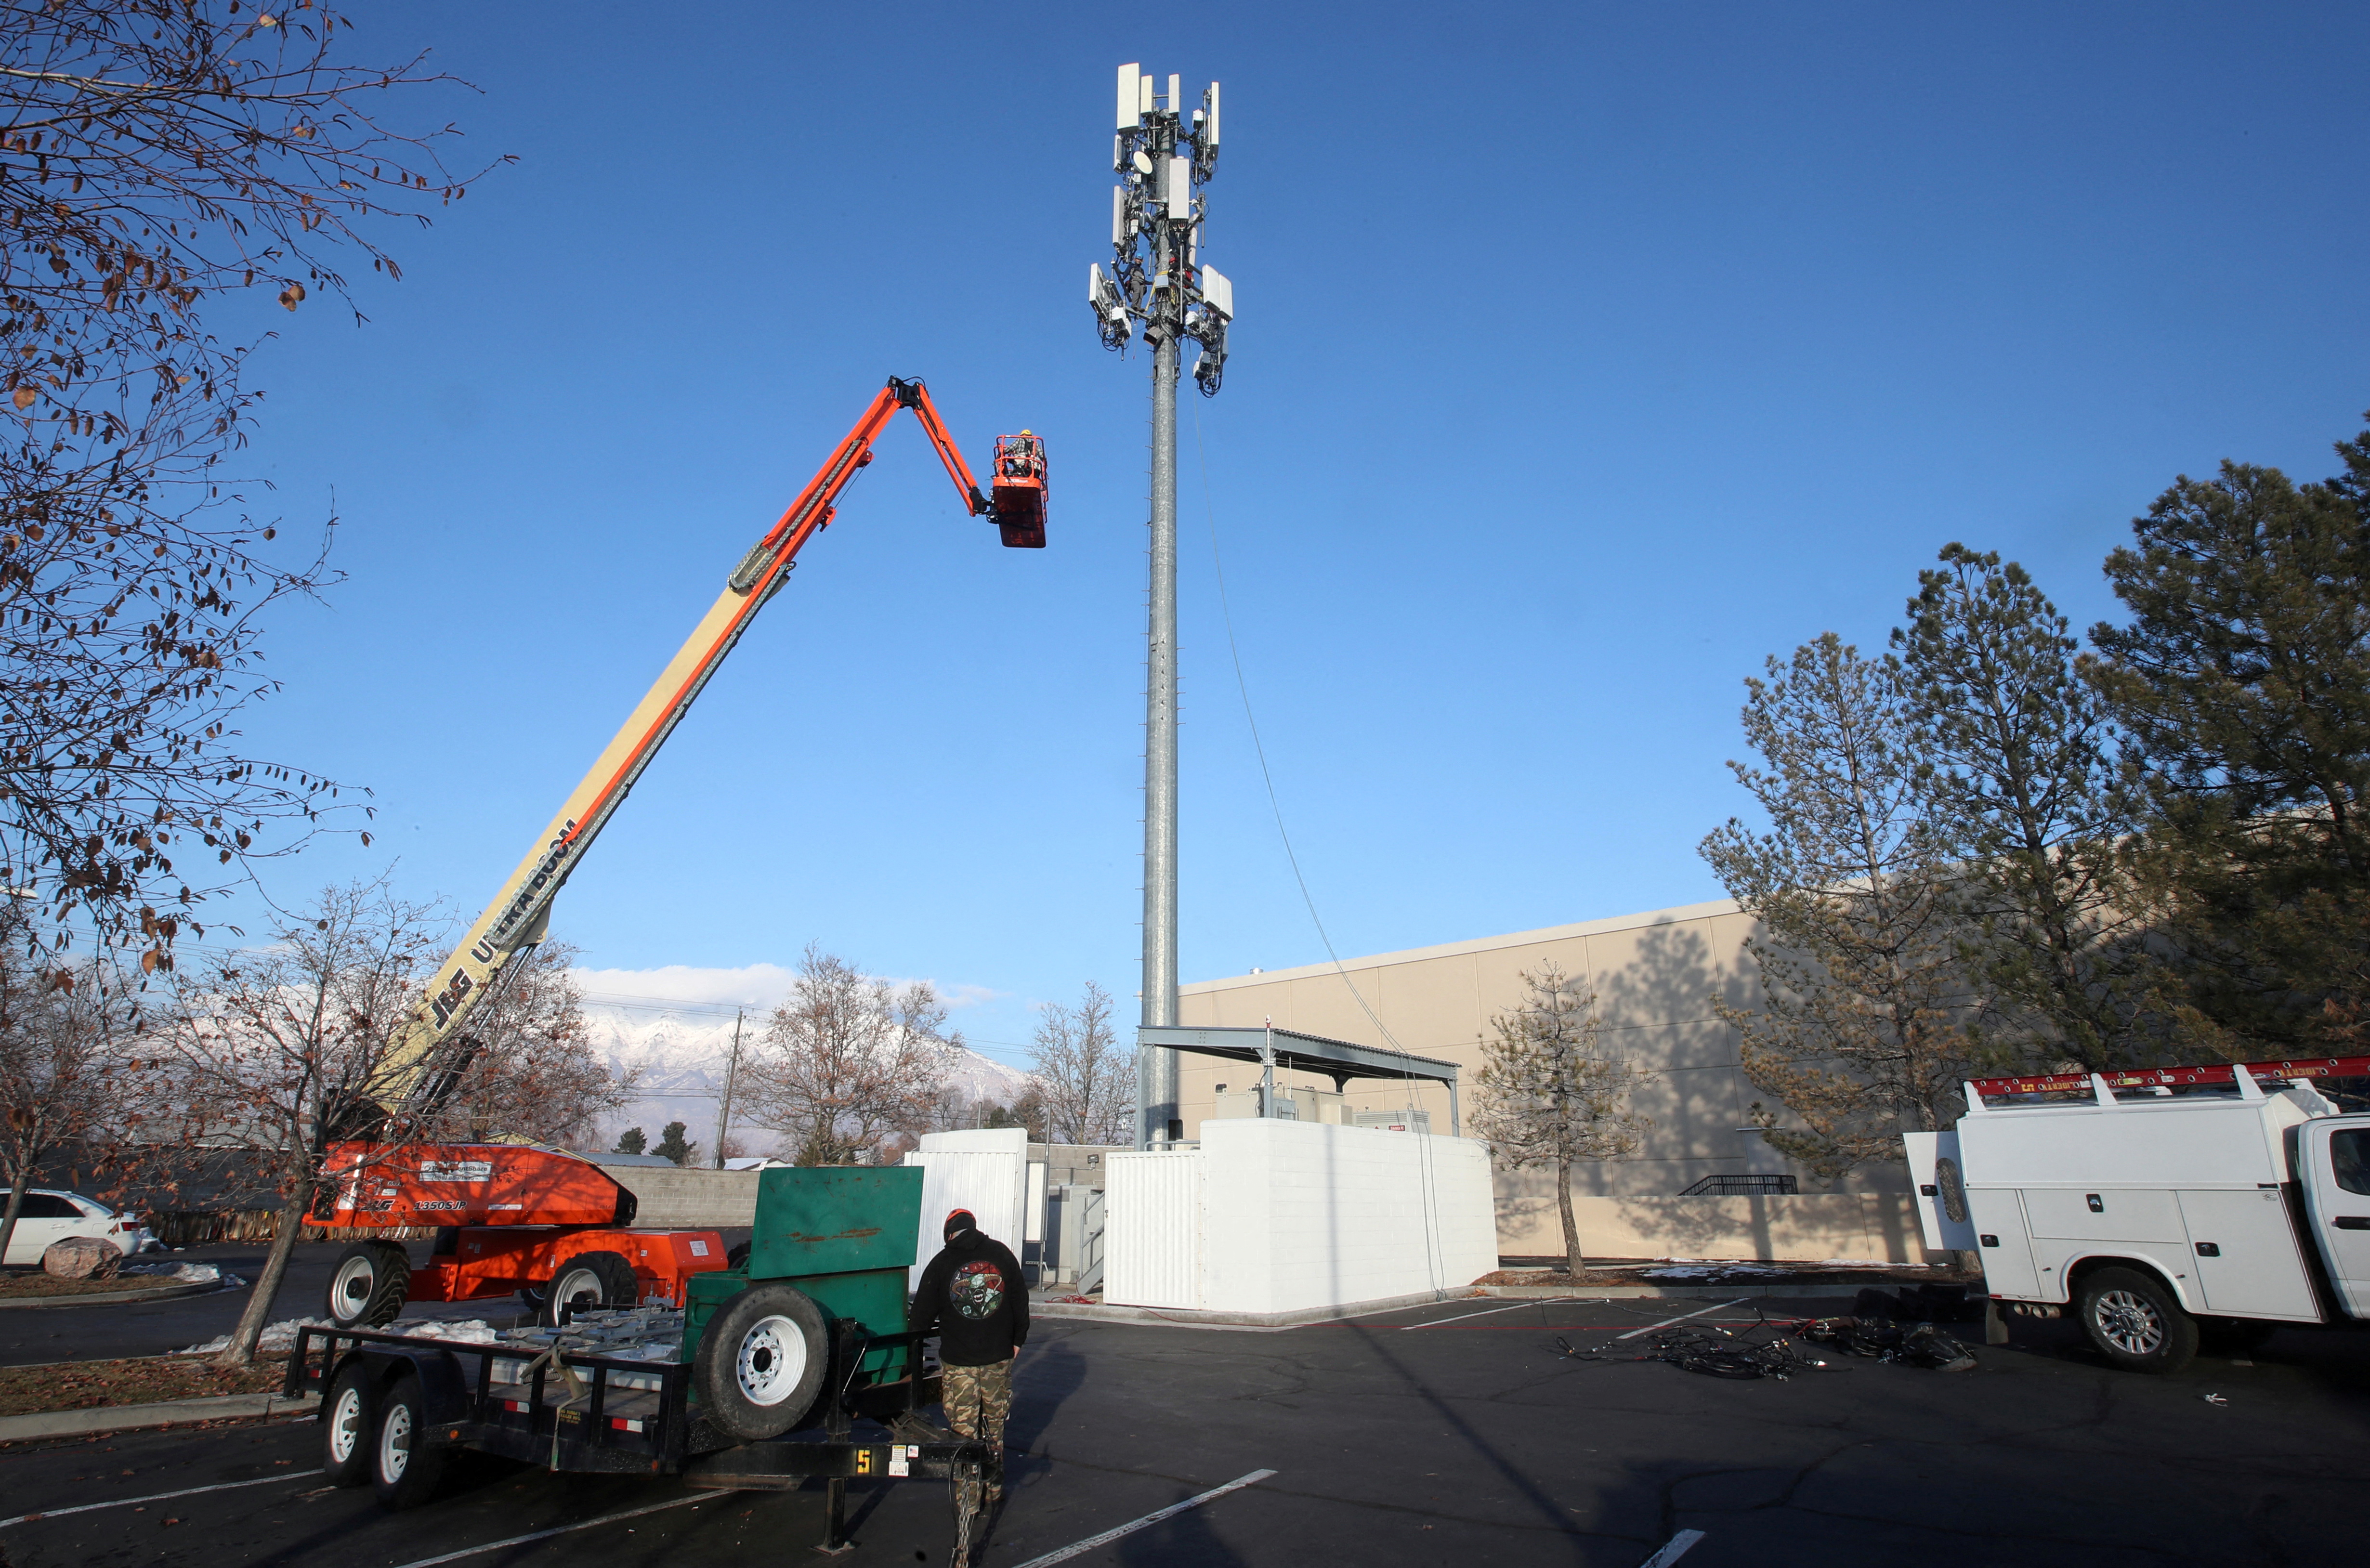 A contract crew from Verizon installs 5G equipment on a tower in Orem